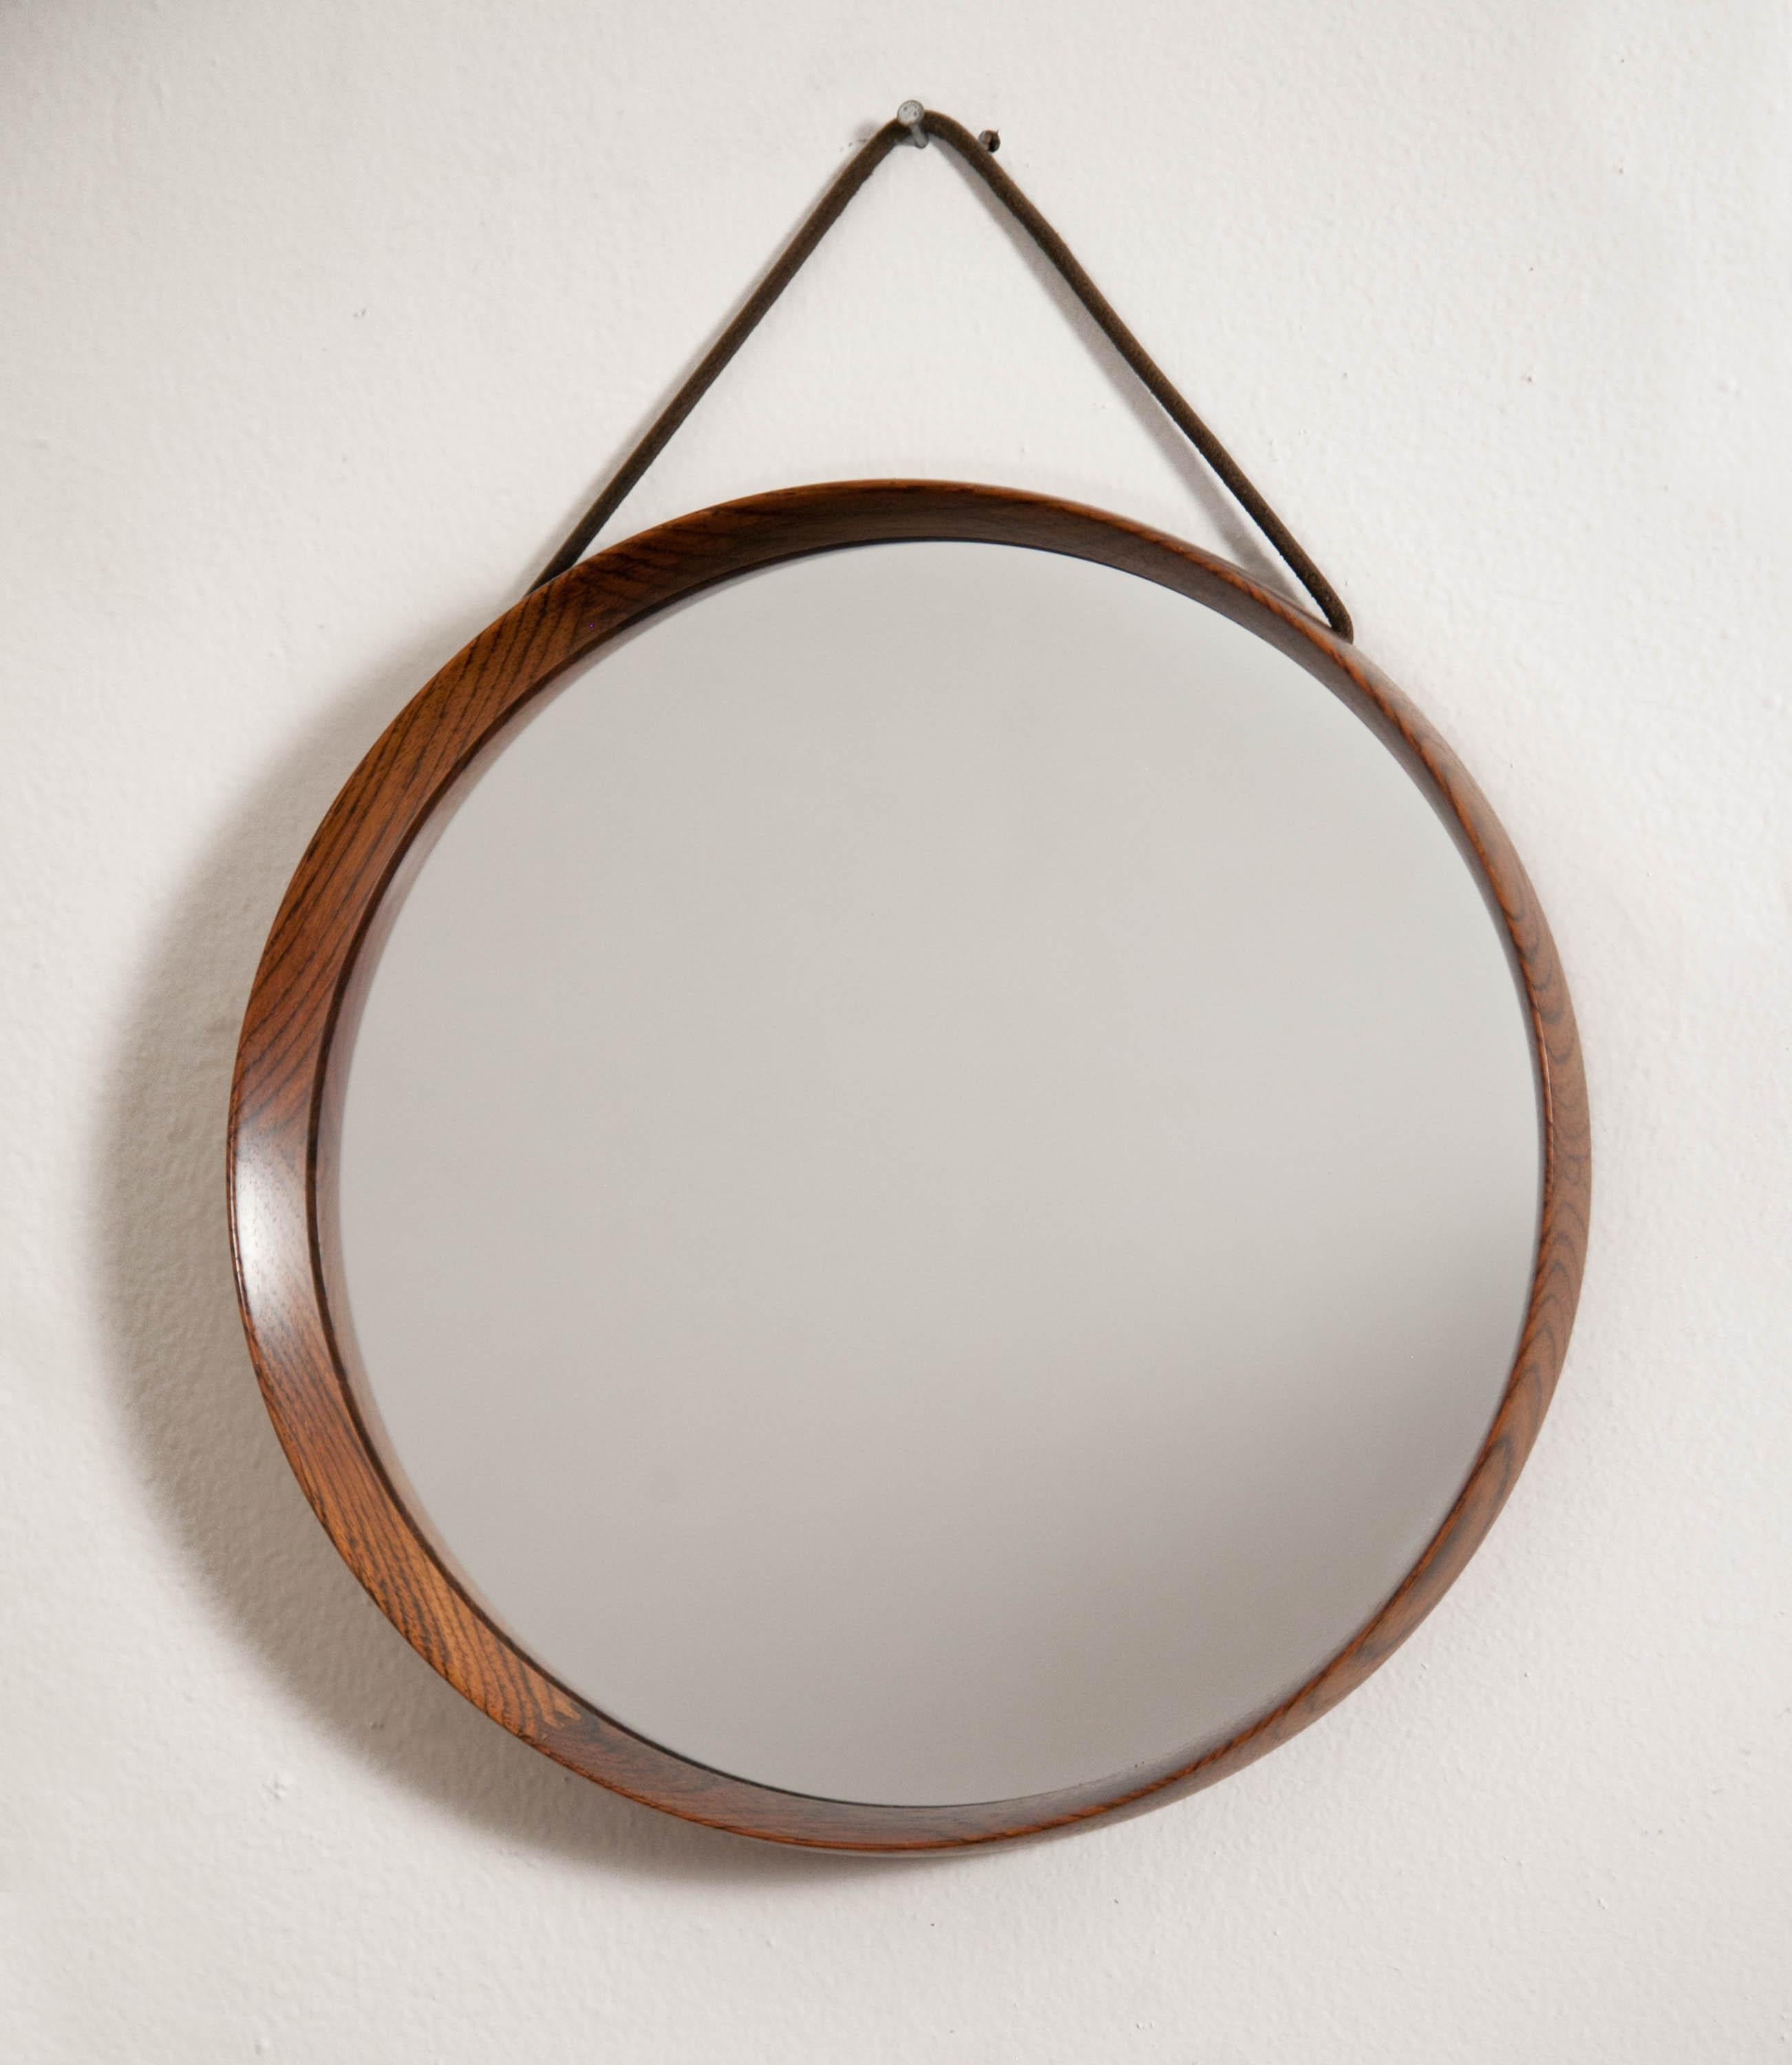 Uno and Osten Kristiansson stained pine mirror by Luxus Vittsjö, Sweden, 1960s

This vintage oak mirror is designed by renowned midcentury Swedish designers Uno and Osten Kristiansson for Luxus in the 1960s. It is truly an exquisite and sought after